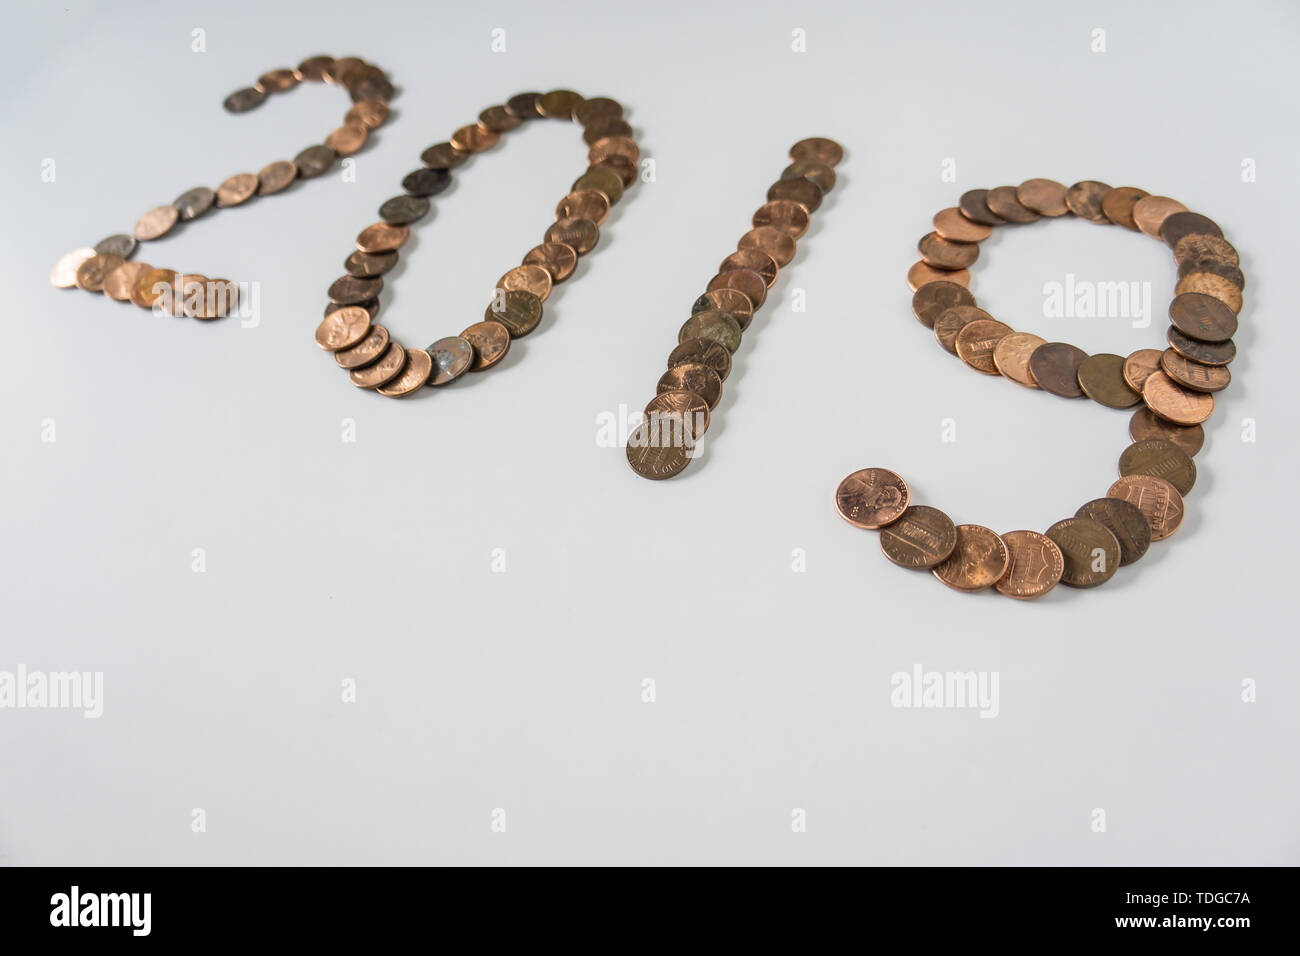 2019 Year made of isolated bronze penny coins on blank white background w/ empty room space for text, copy, or copyspace. This current now present wit Stock Photo